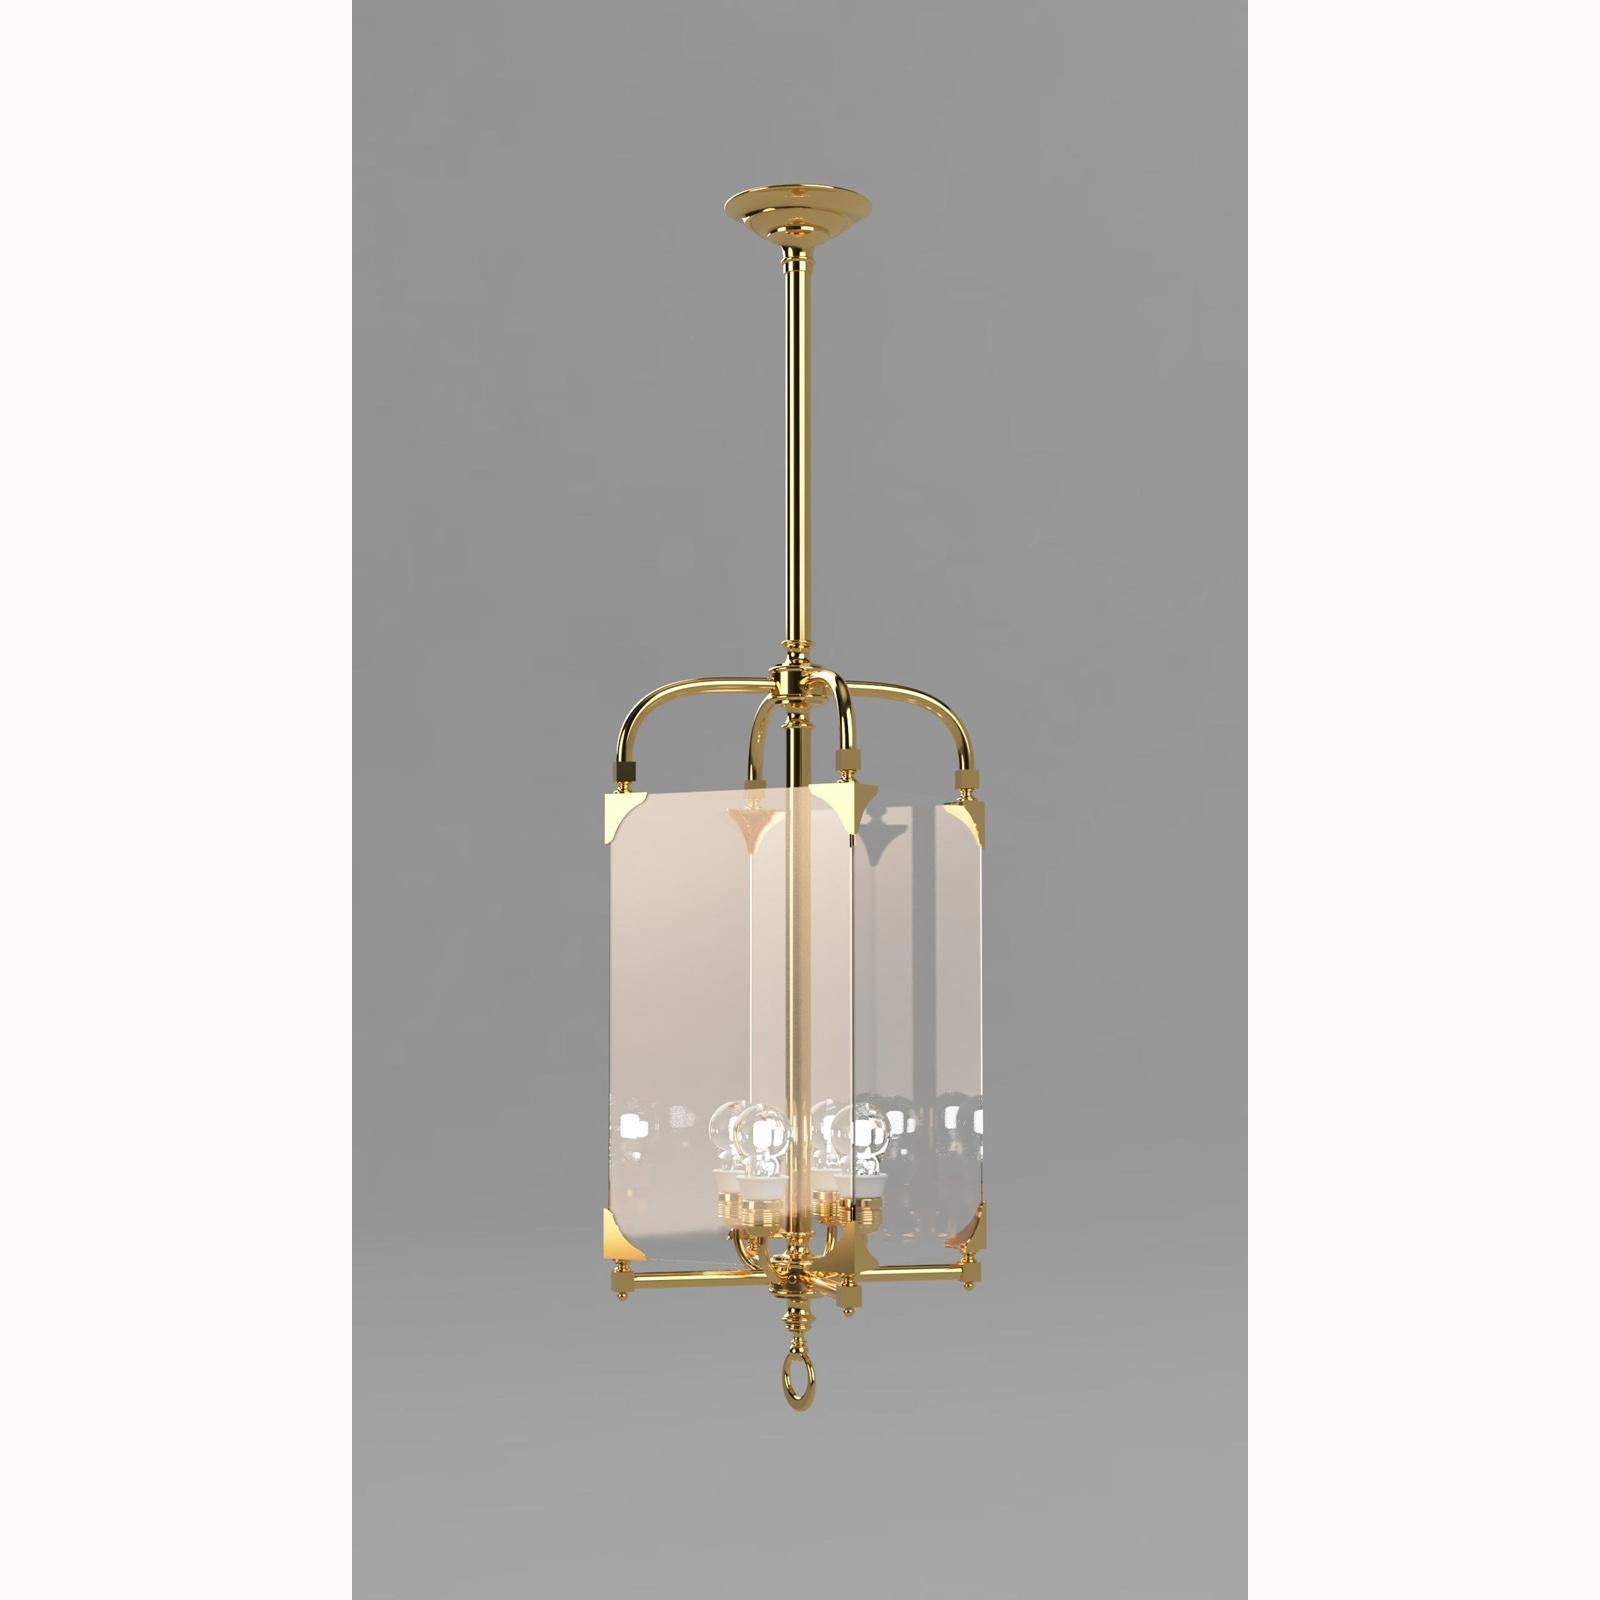 Adolf Loos Secession Jugendstil Glass and Brass Lantern Chandelier Re-Edition In New Condition For Sale In Vienna, AT